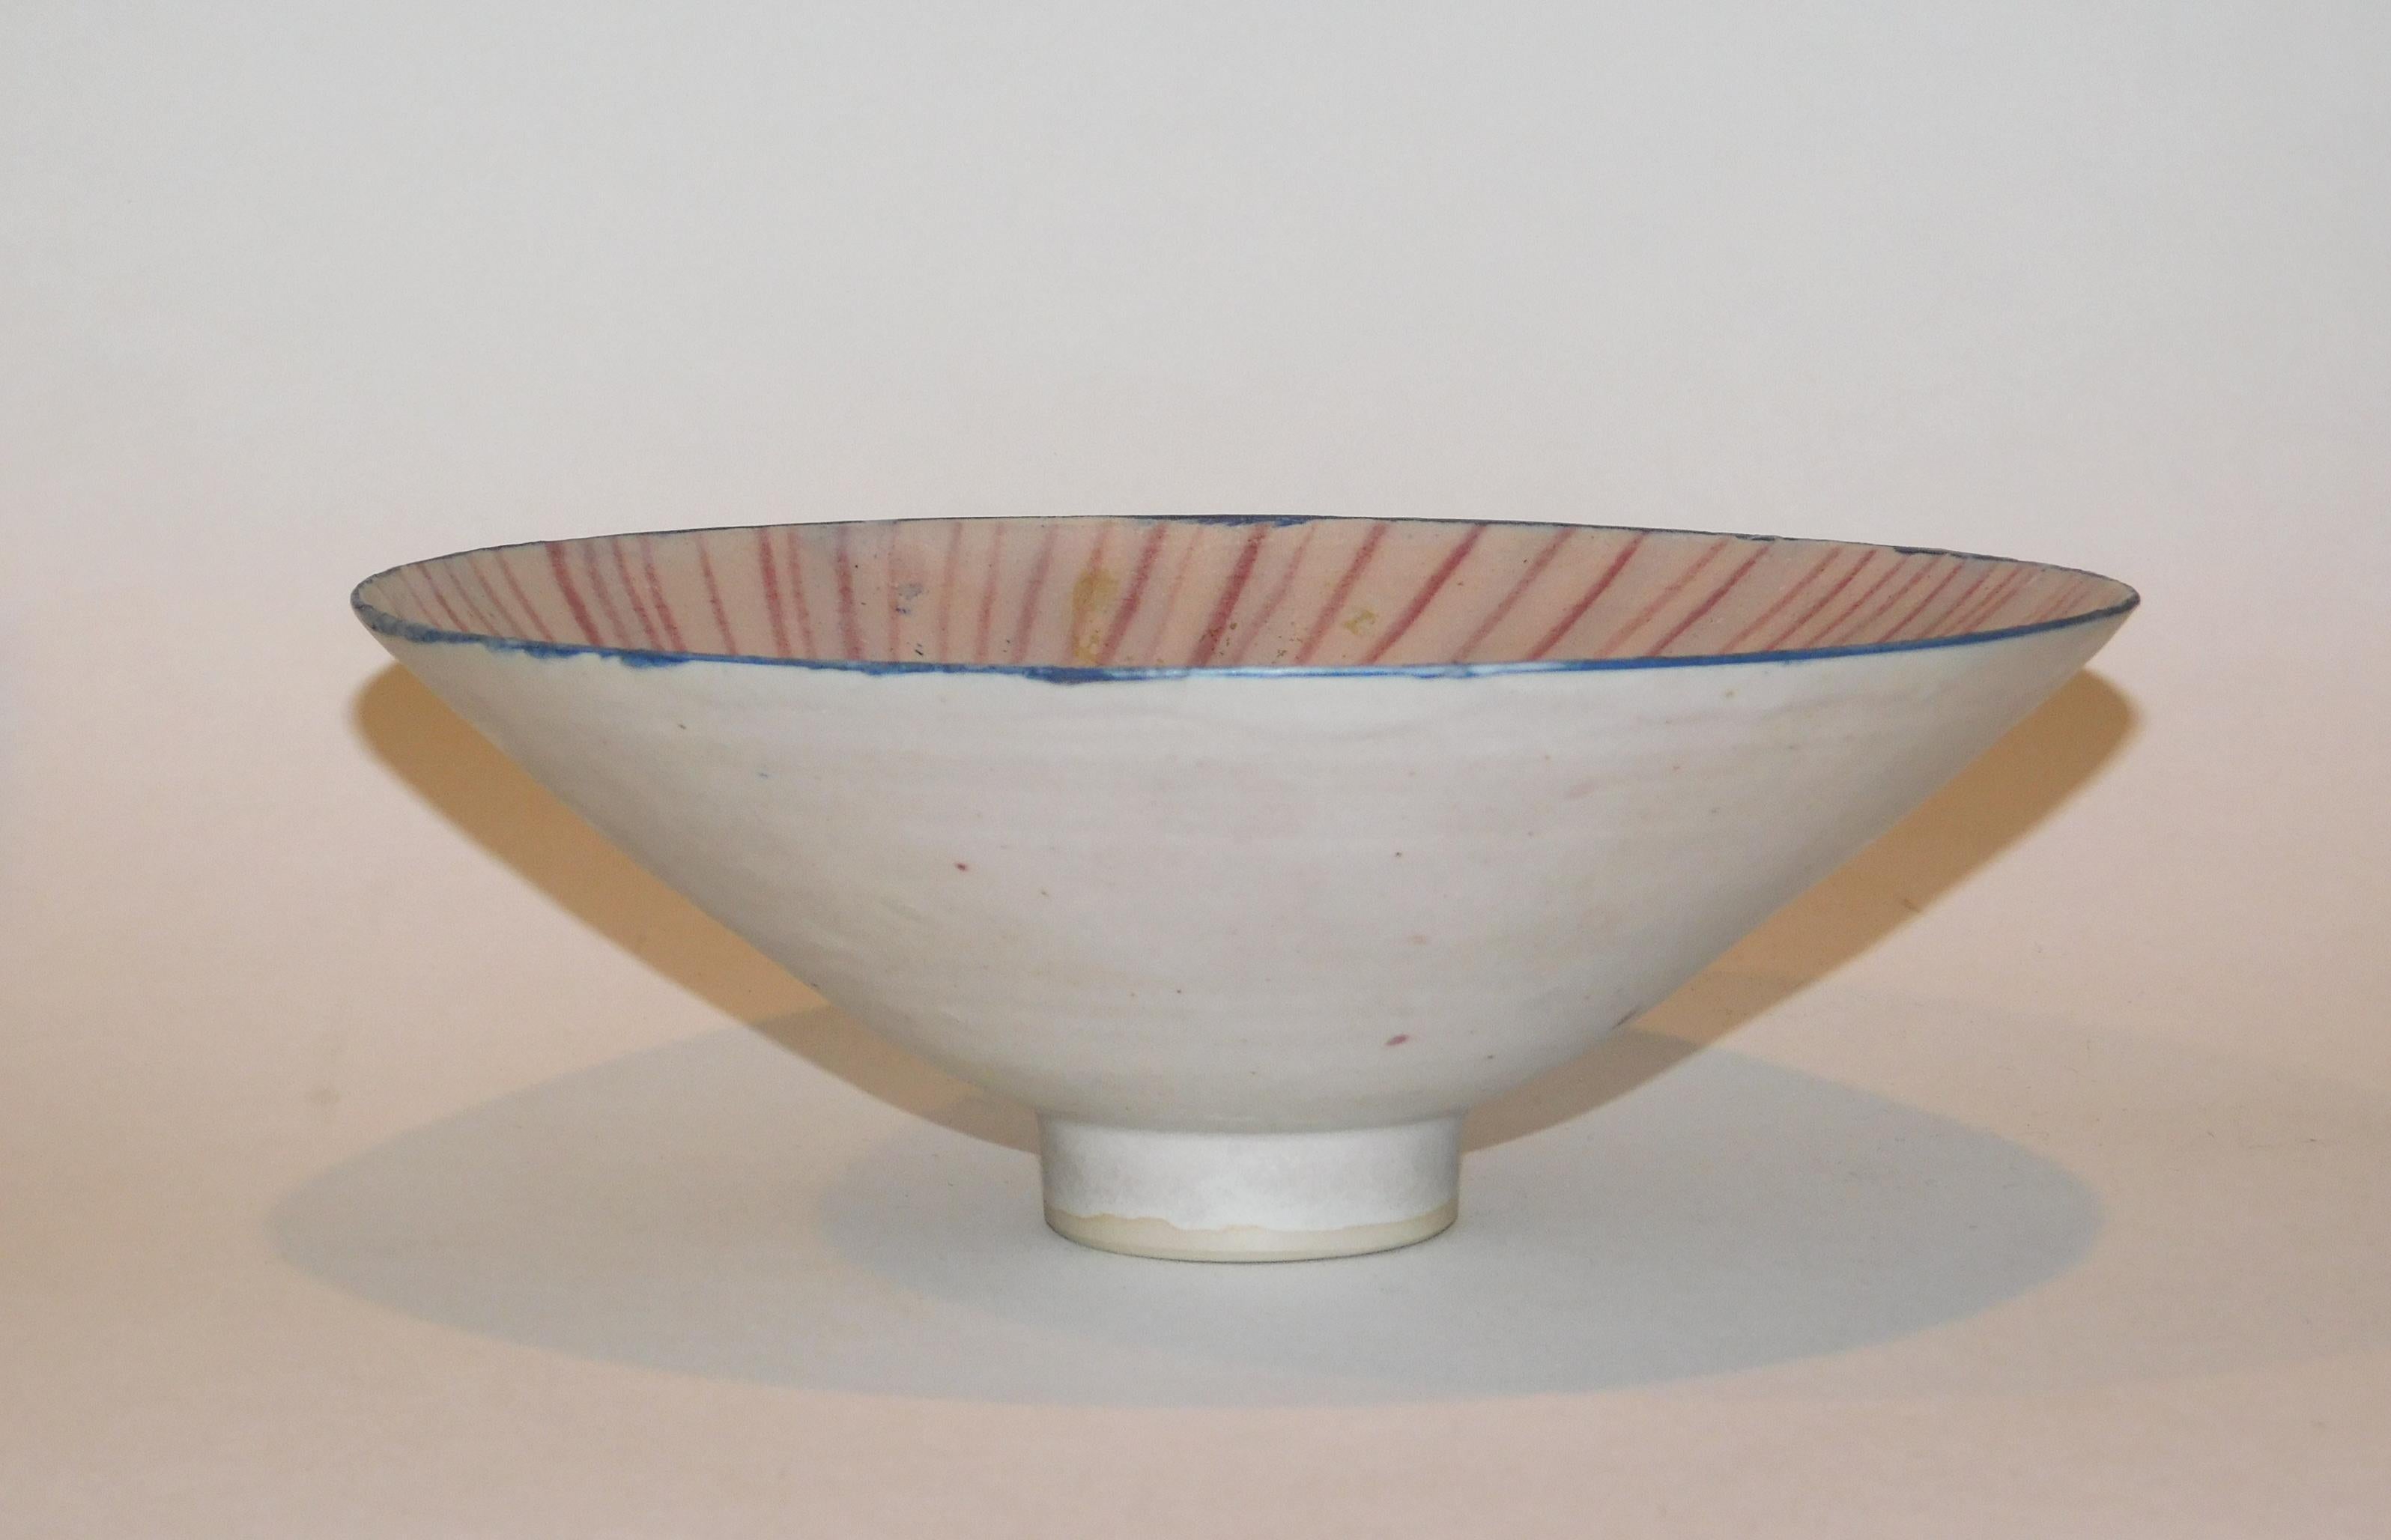  Emmanuel Cooper Important British Ceramist Flared Footed Studio Bowl In Good Condition For Sale In Phoenix, AZ